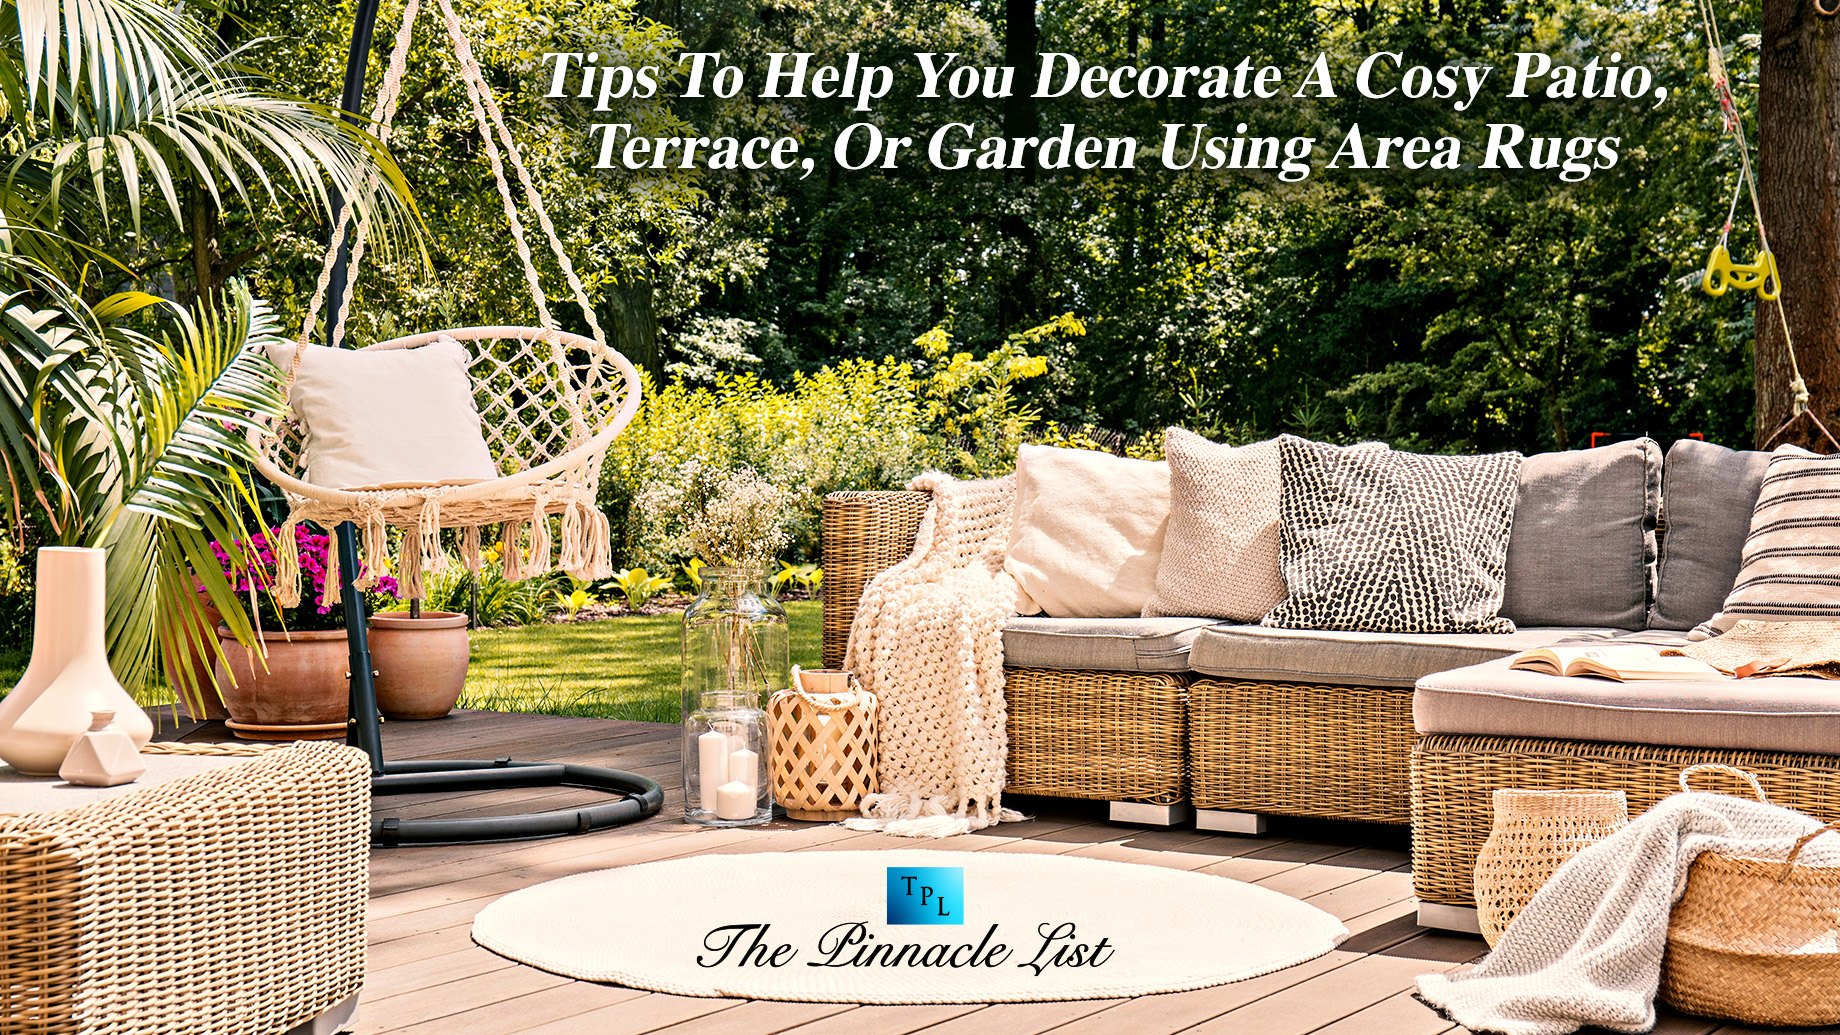 Tips To Help You Decorate A Cosy Patio, Terrace, Or Garden Using Area Rugs